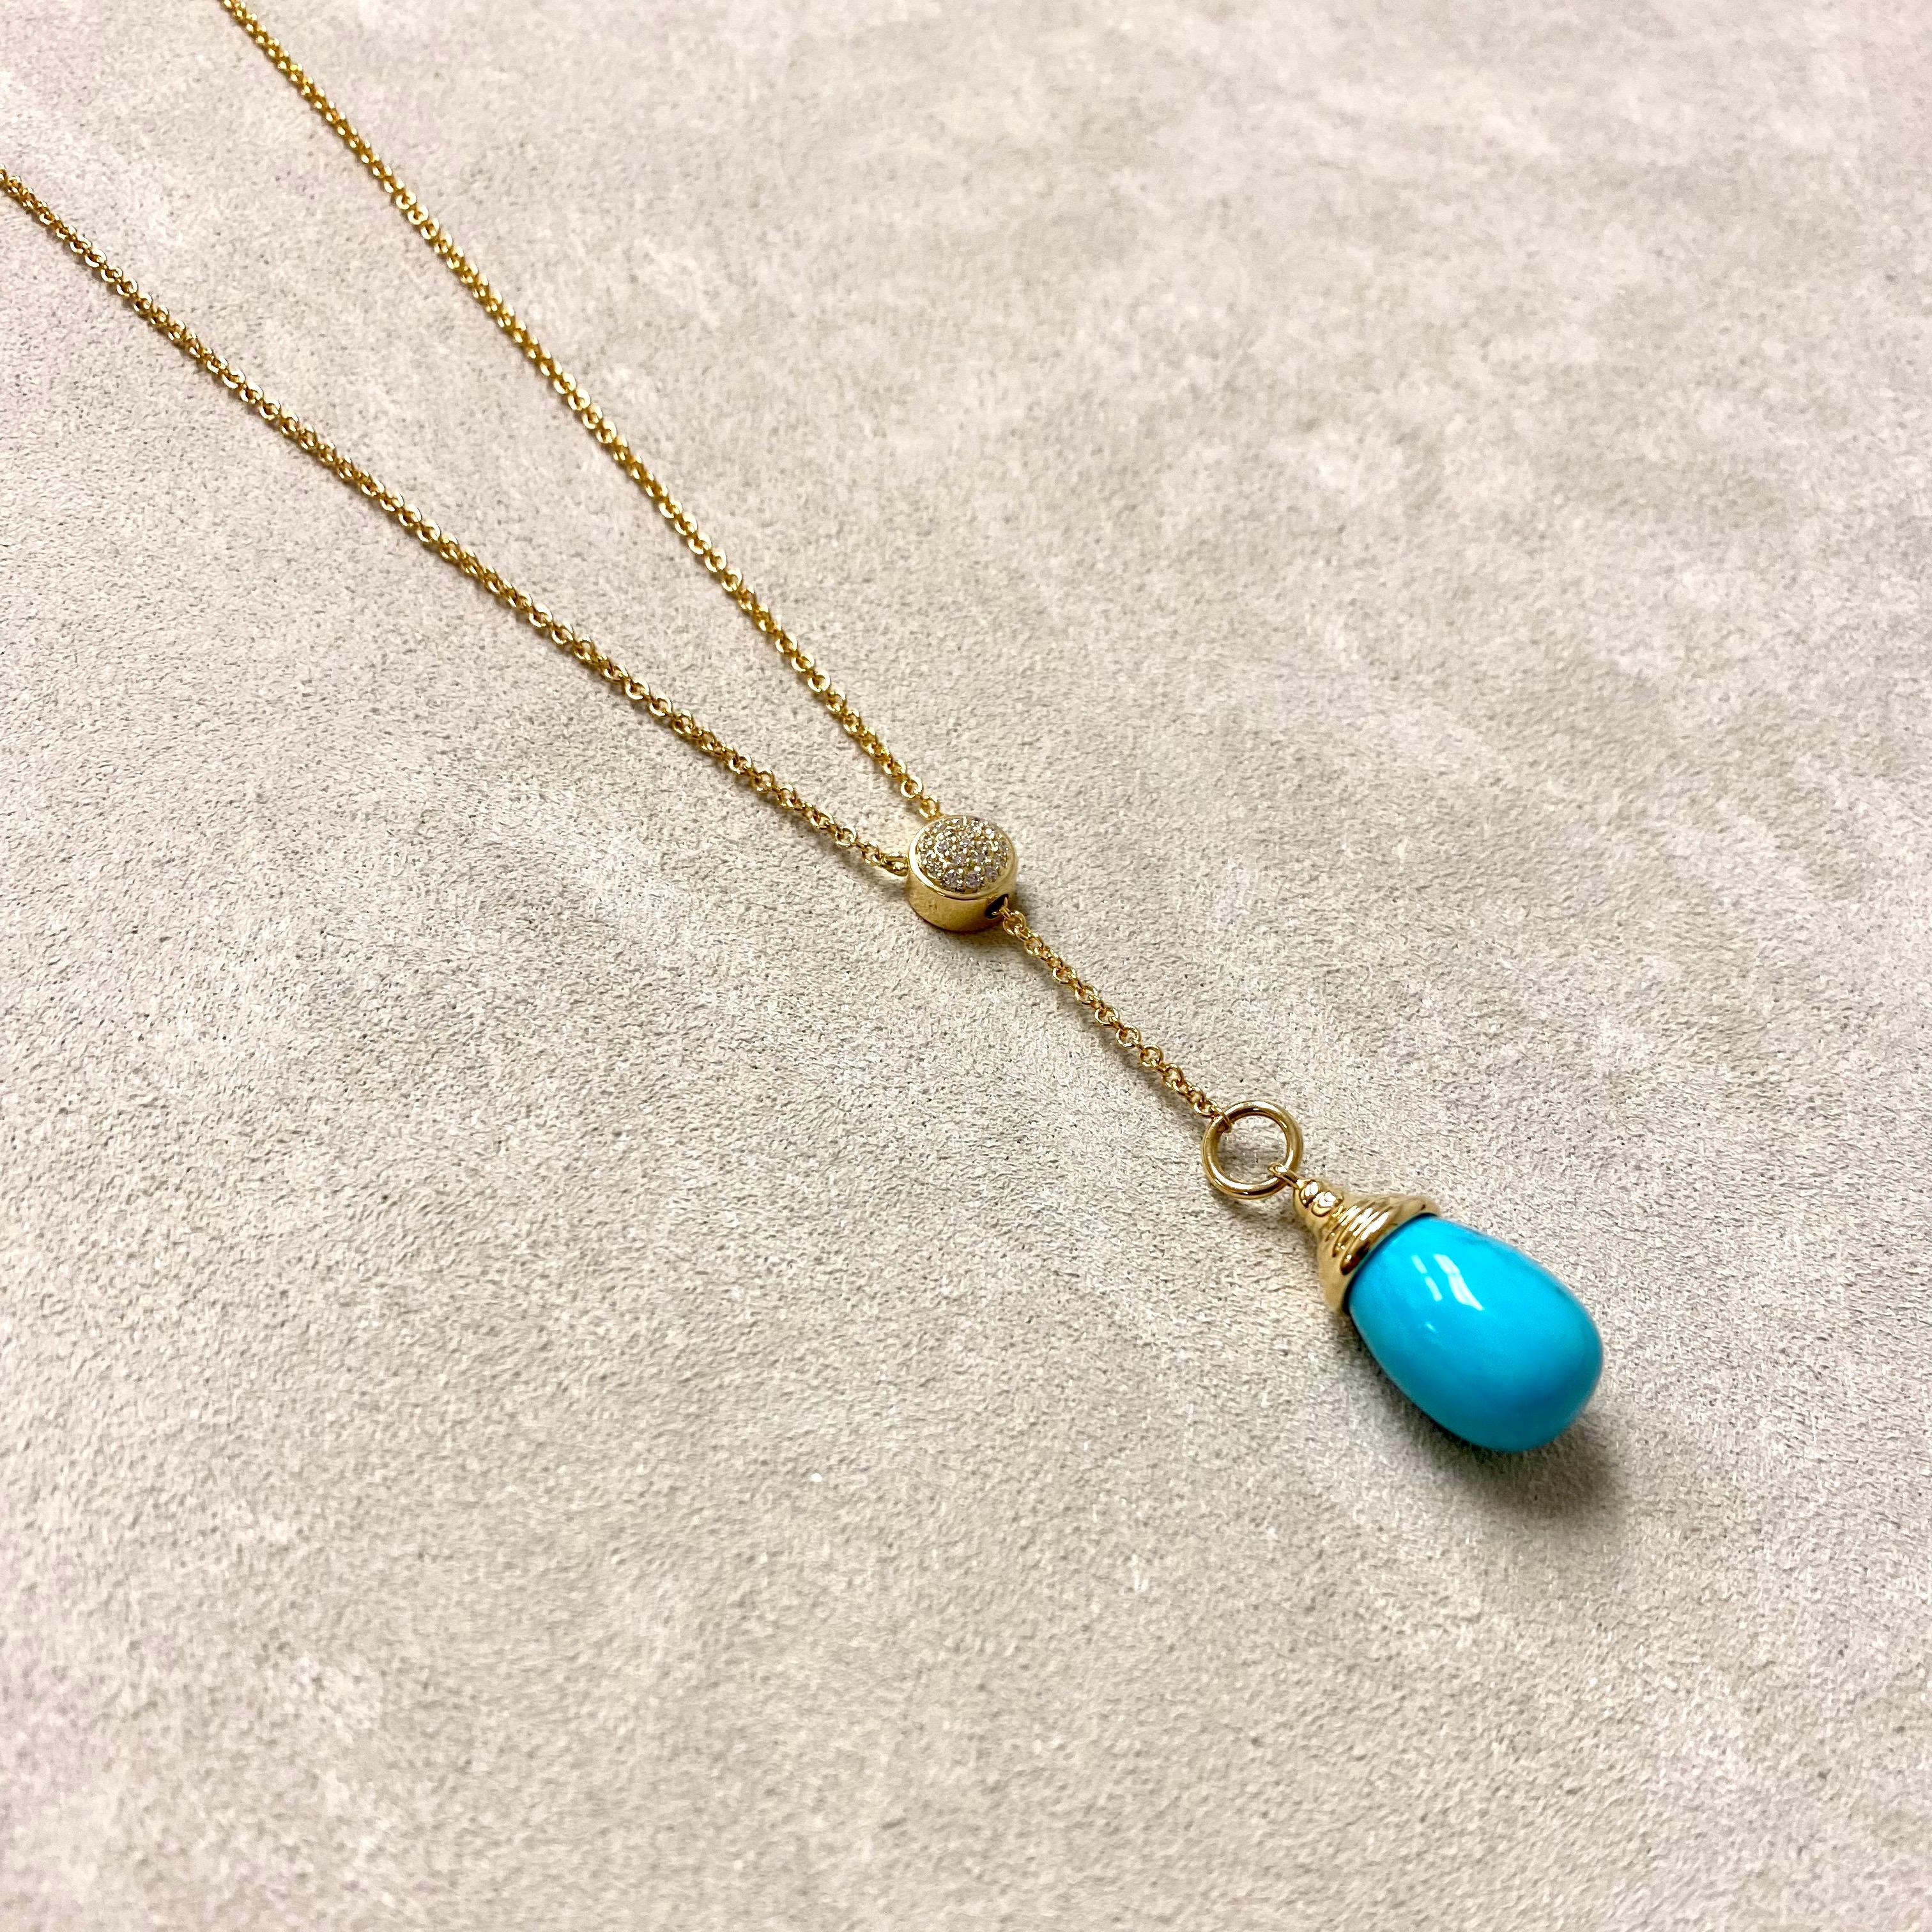 Round Cut Syna Yellow Gold Sleeping Beauty Turquoise Necklace with Champagne Diamonds